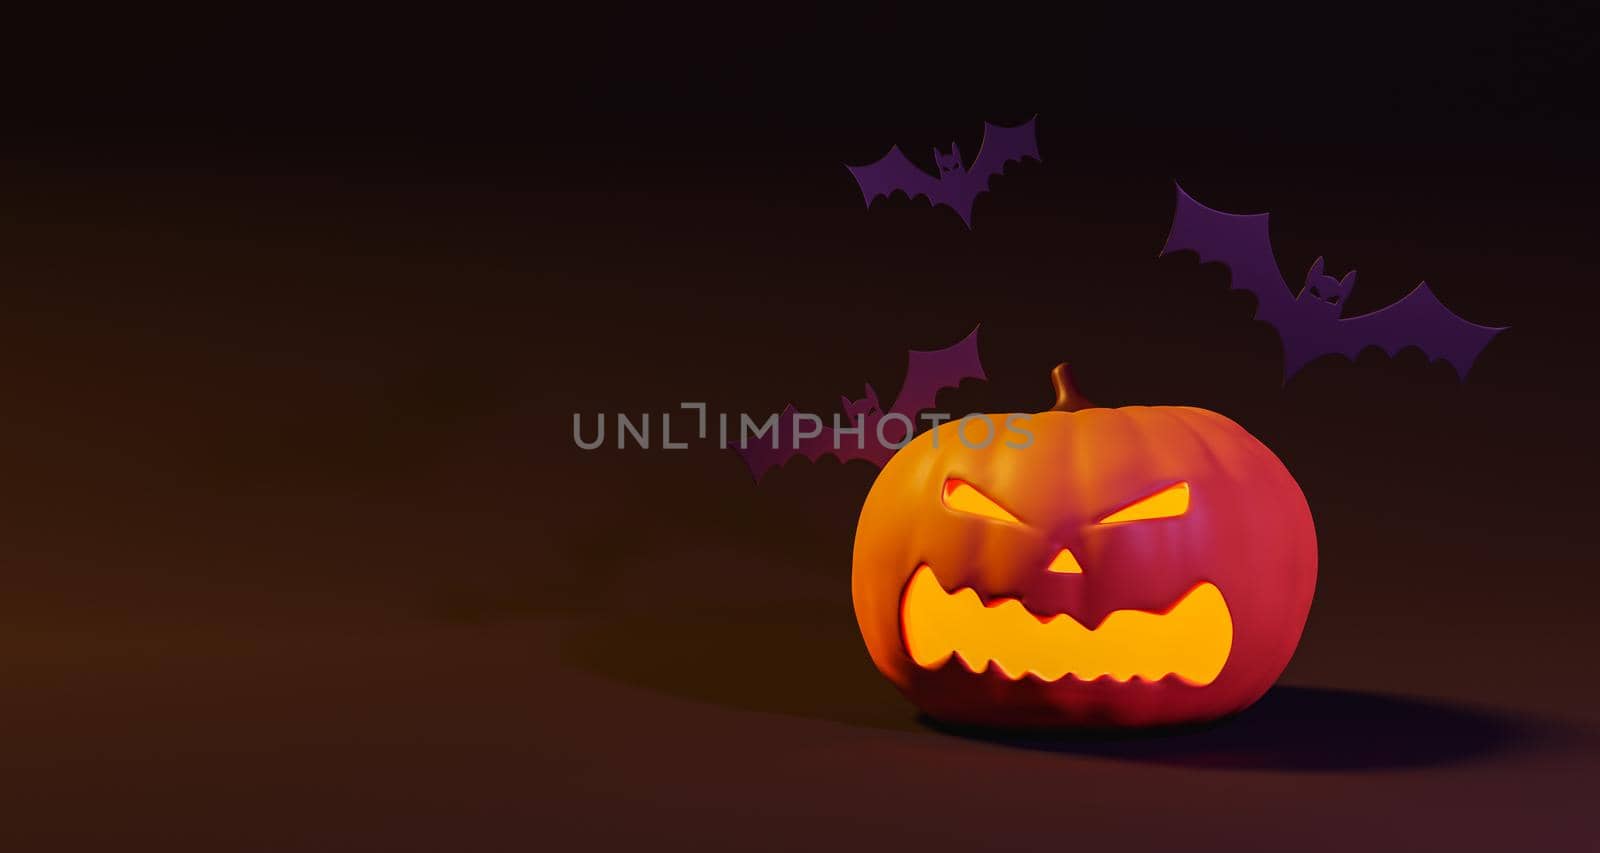 3D rendering of jack o lantern with angry face and bats against brown background during Halloween celebration